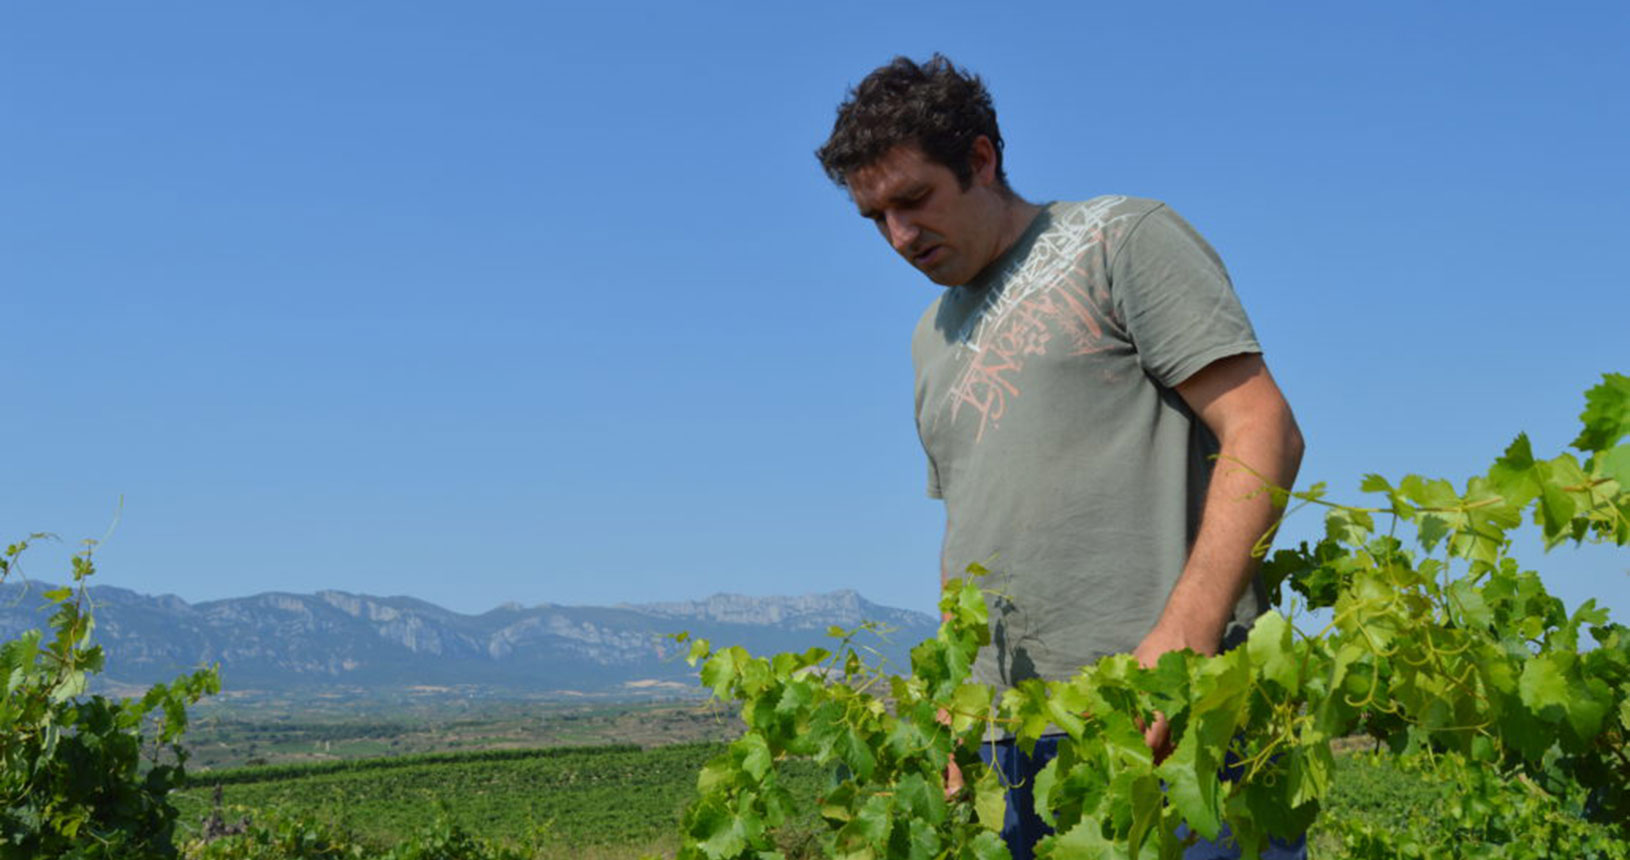 Small independent winemakers